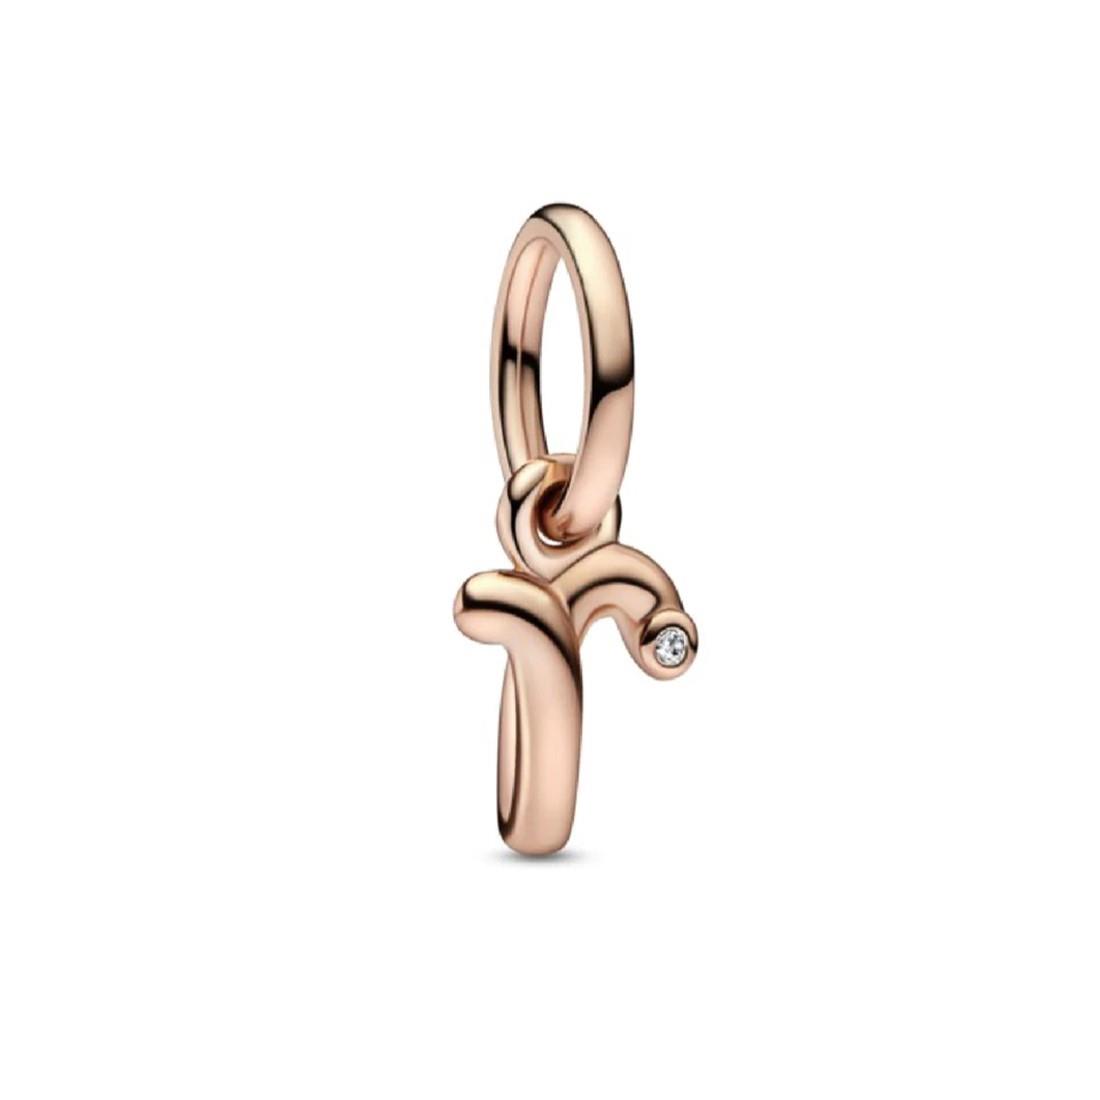 Alphabet pendant charm with letter r with rose gold plating - PANDORA